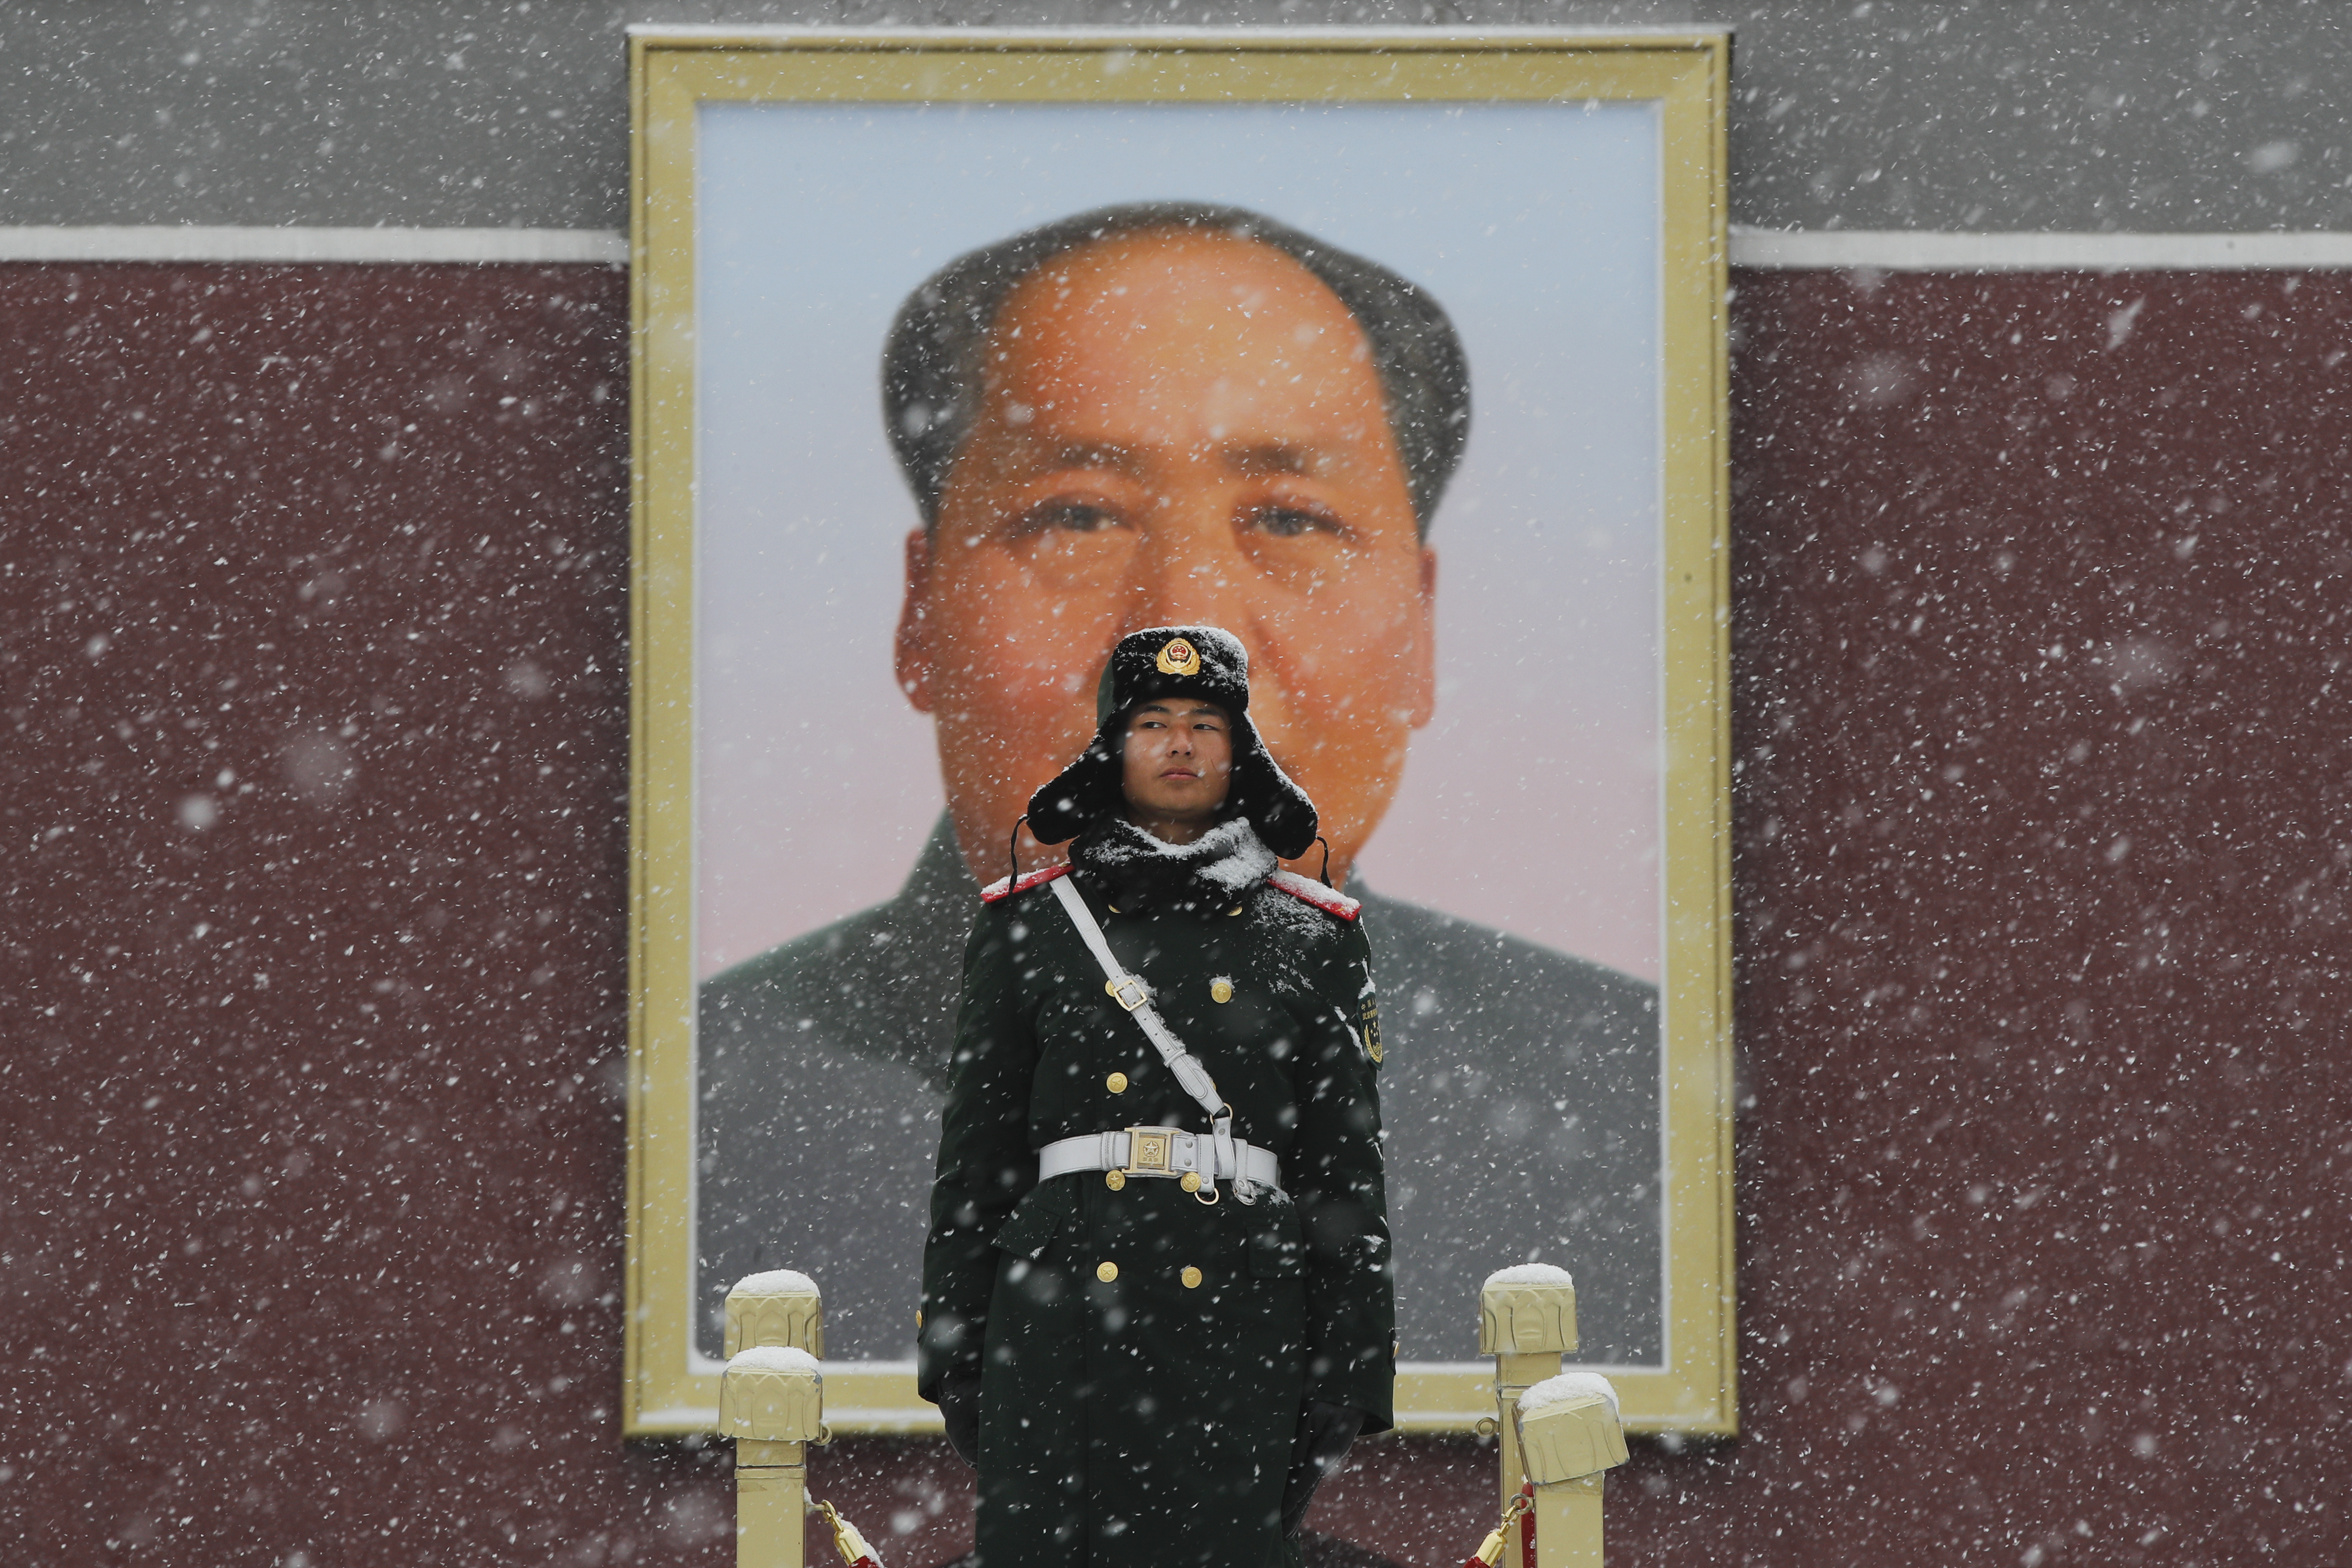 A Chinese paramilitary policeman stands guard under the portrait of former leader Mao Zedong outside the Tiananmen Gate as snow fall in Beijing, Tuesday, Feb. 12, 2019. China's capital is mostly dry in the winter but a storm system brought snow to the city on Tuesday morning. (AP Photo/Andy Wong)